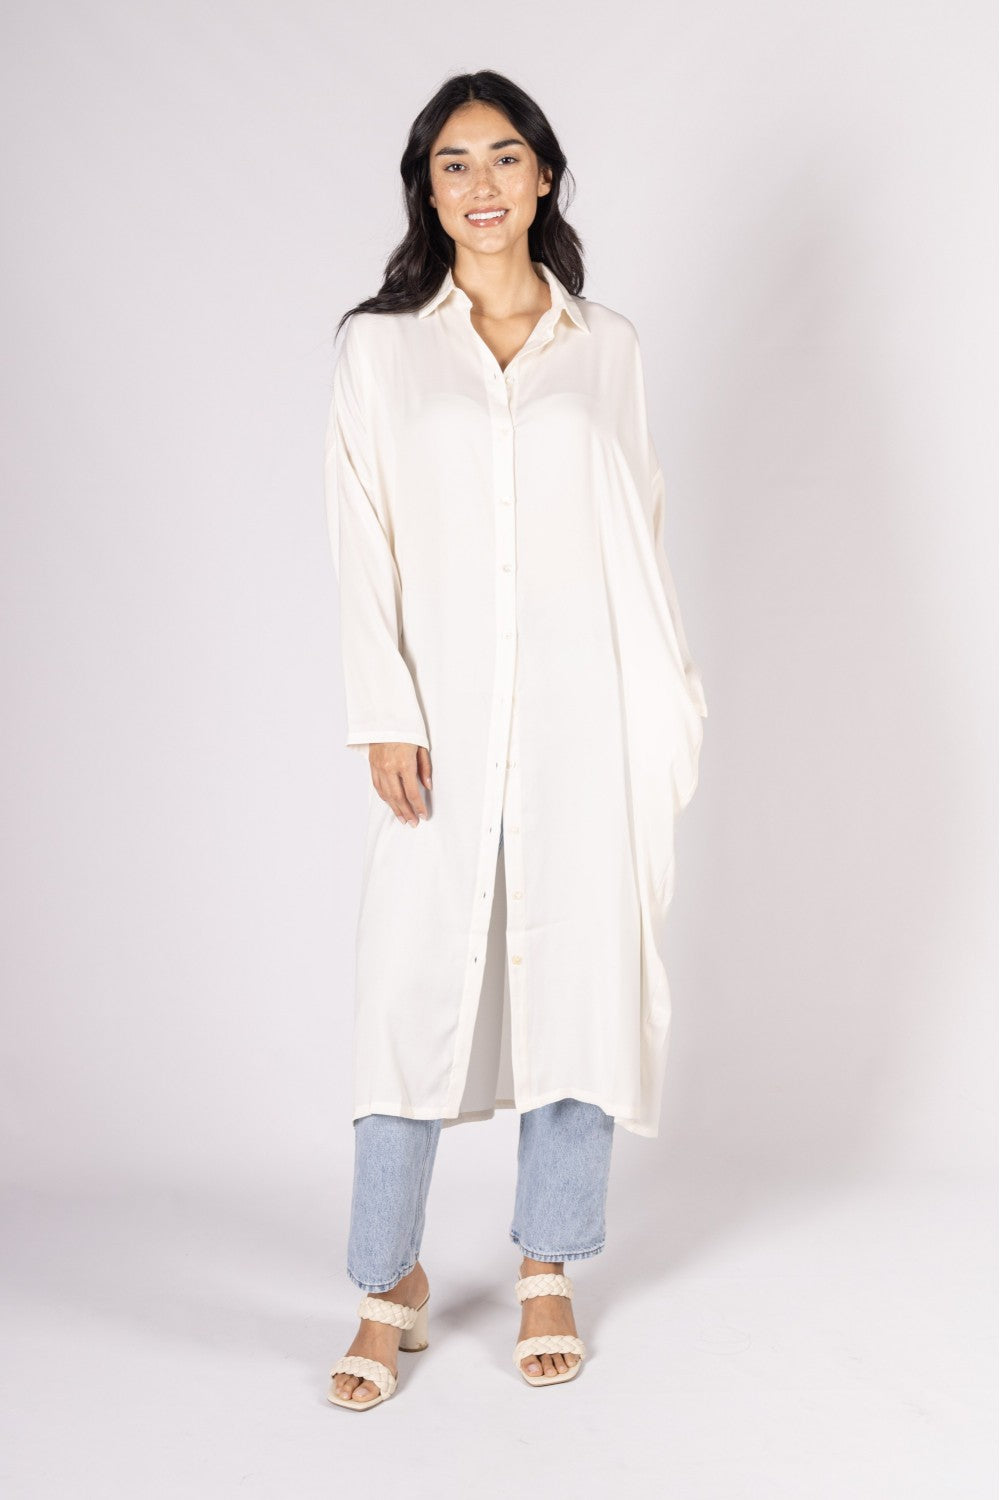 BEFORE YOU COLLECTION SOFT SATIN OVERSIZED BUTTON UP SHIRT DRESS